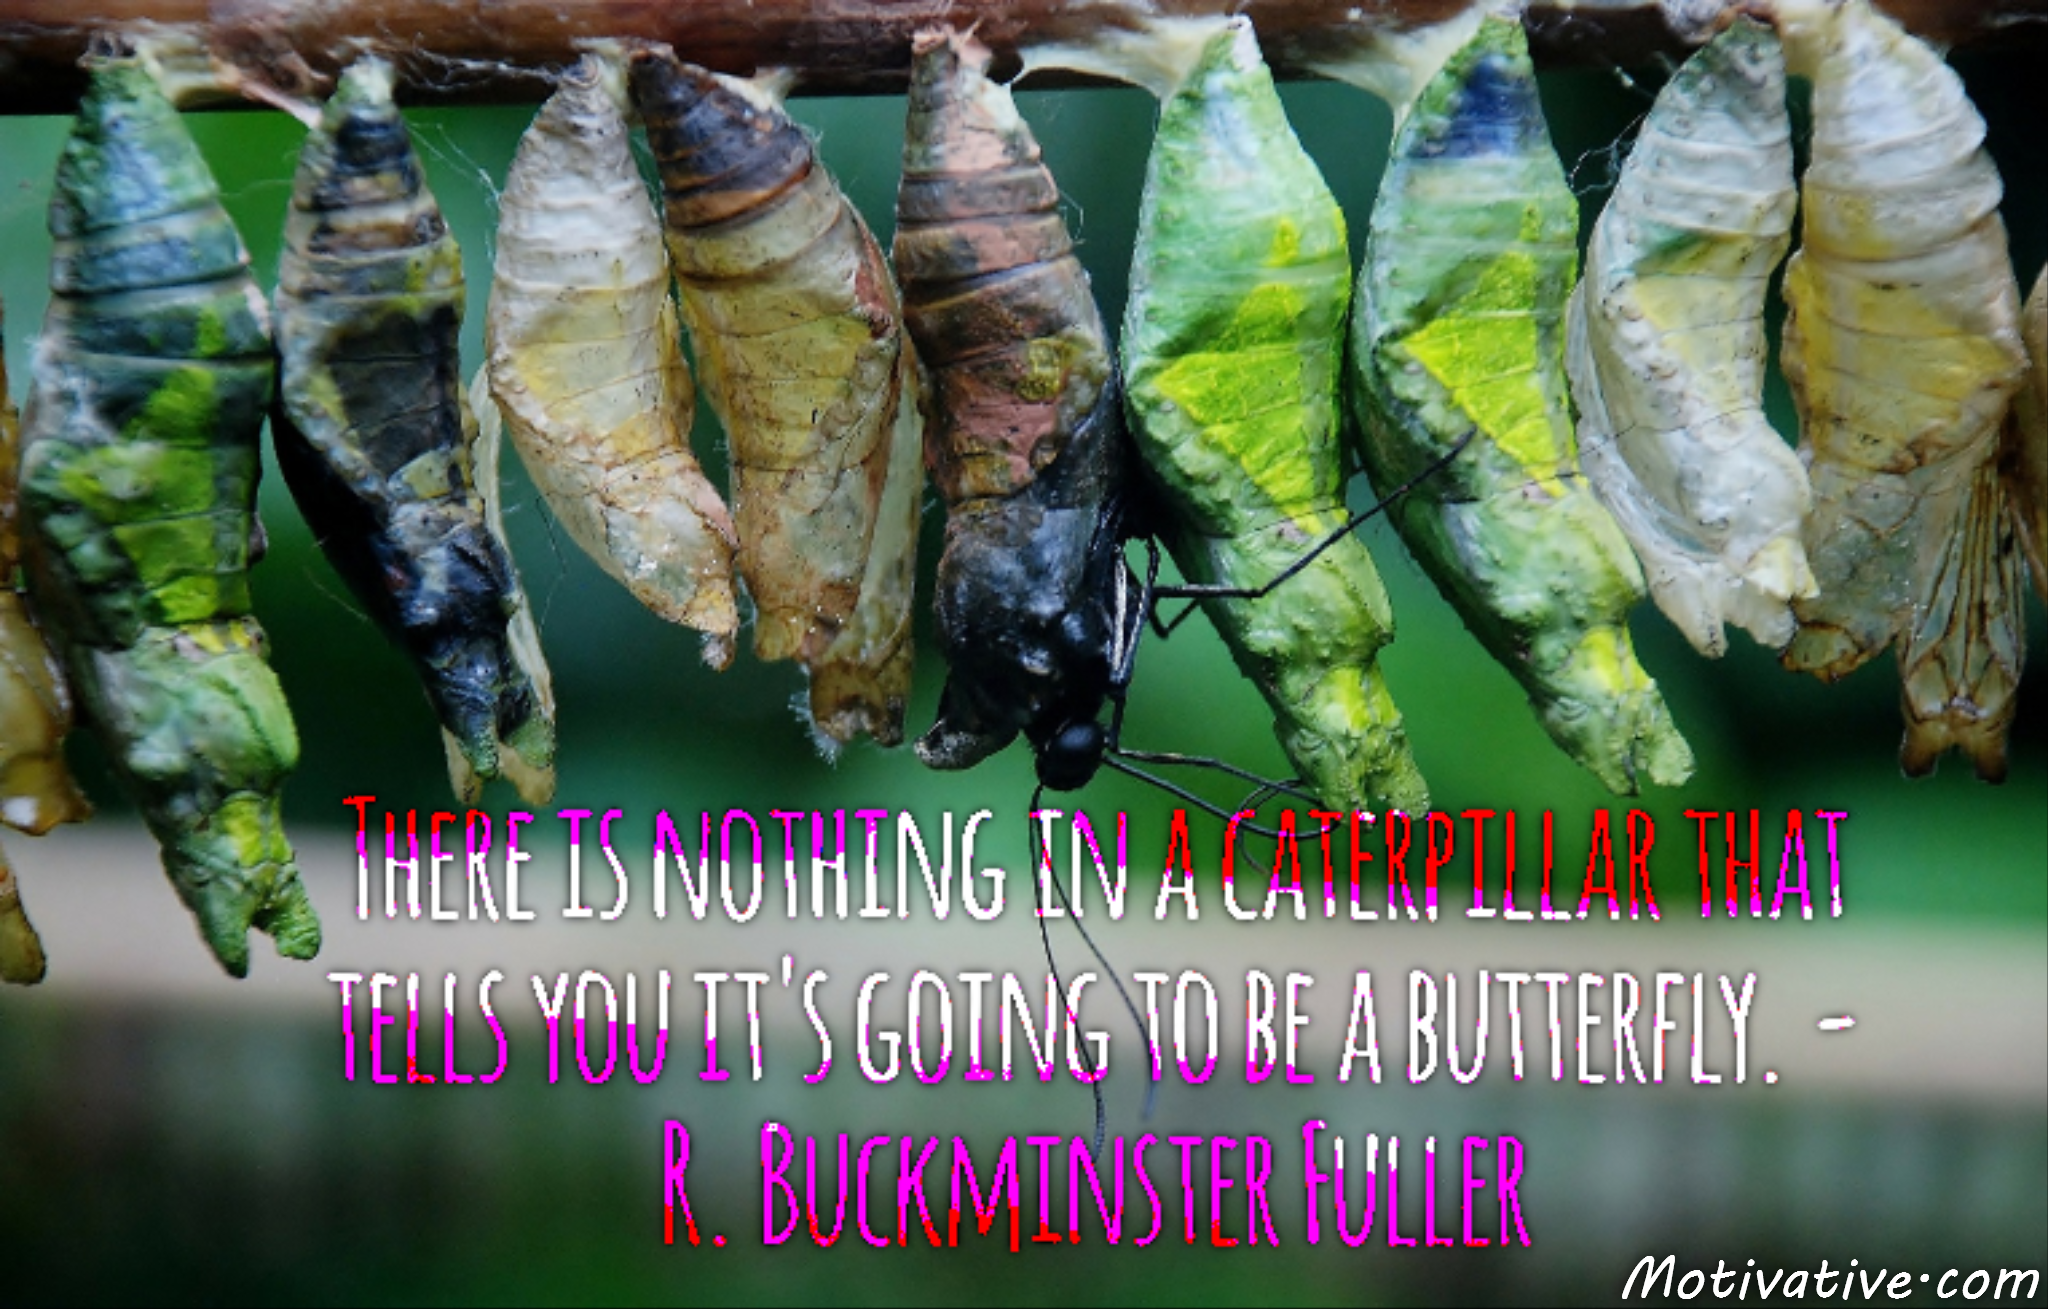 There is nothing in a caterpillar that tells you it’s going to be a butterfly. – R. Buckminster Fuller